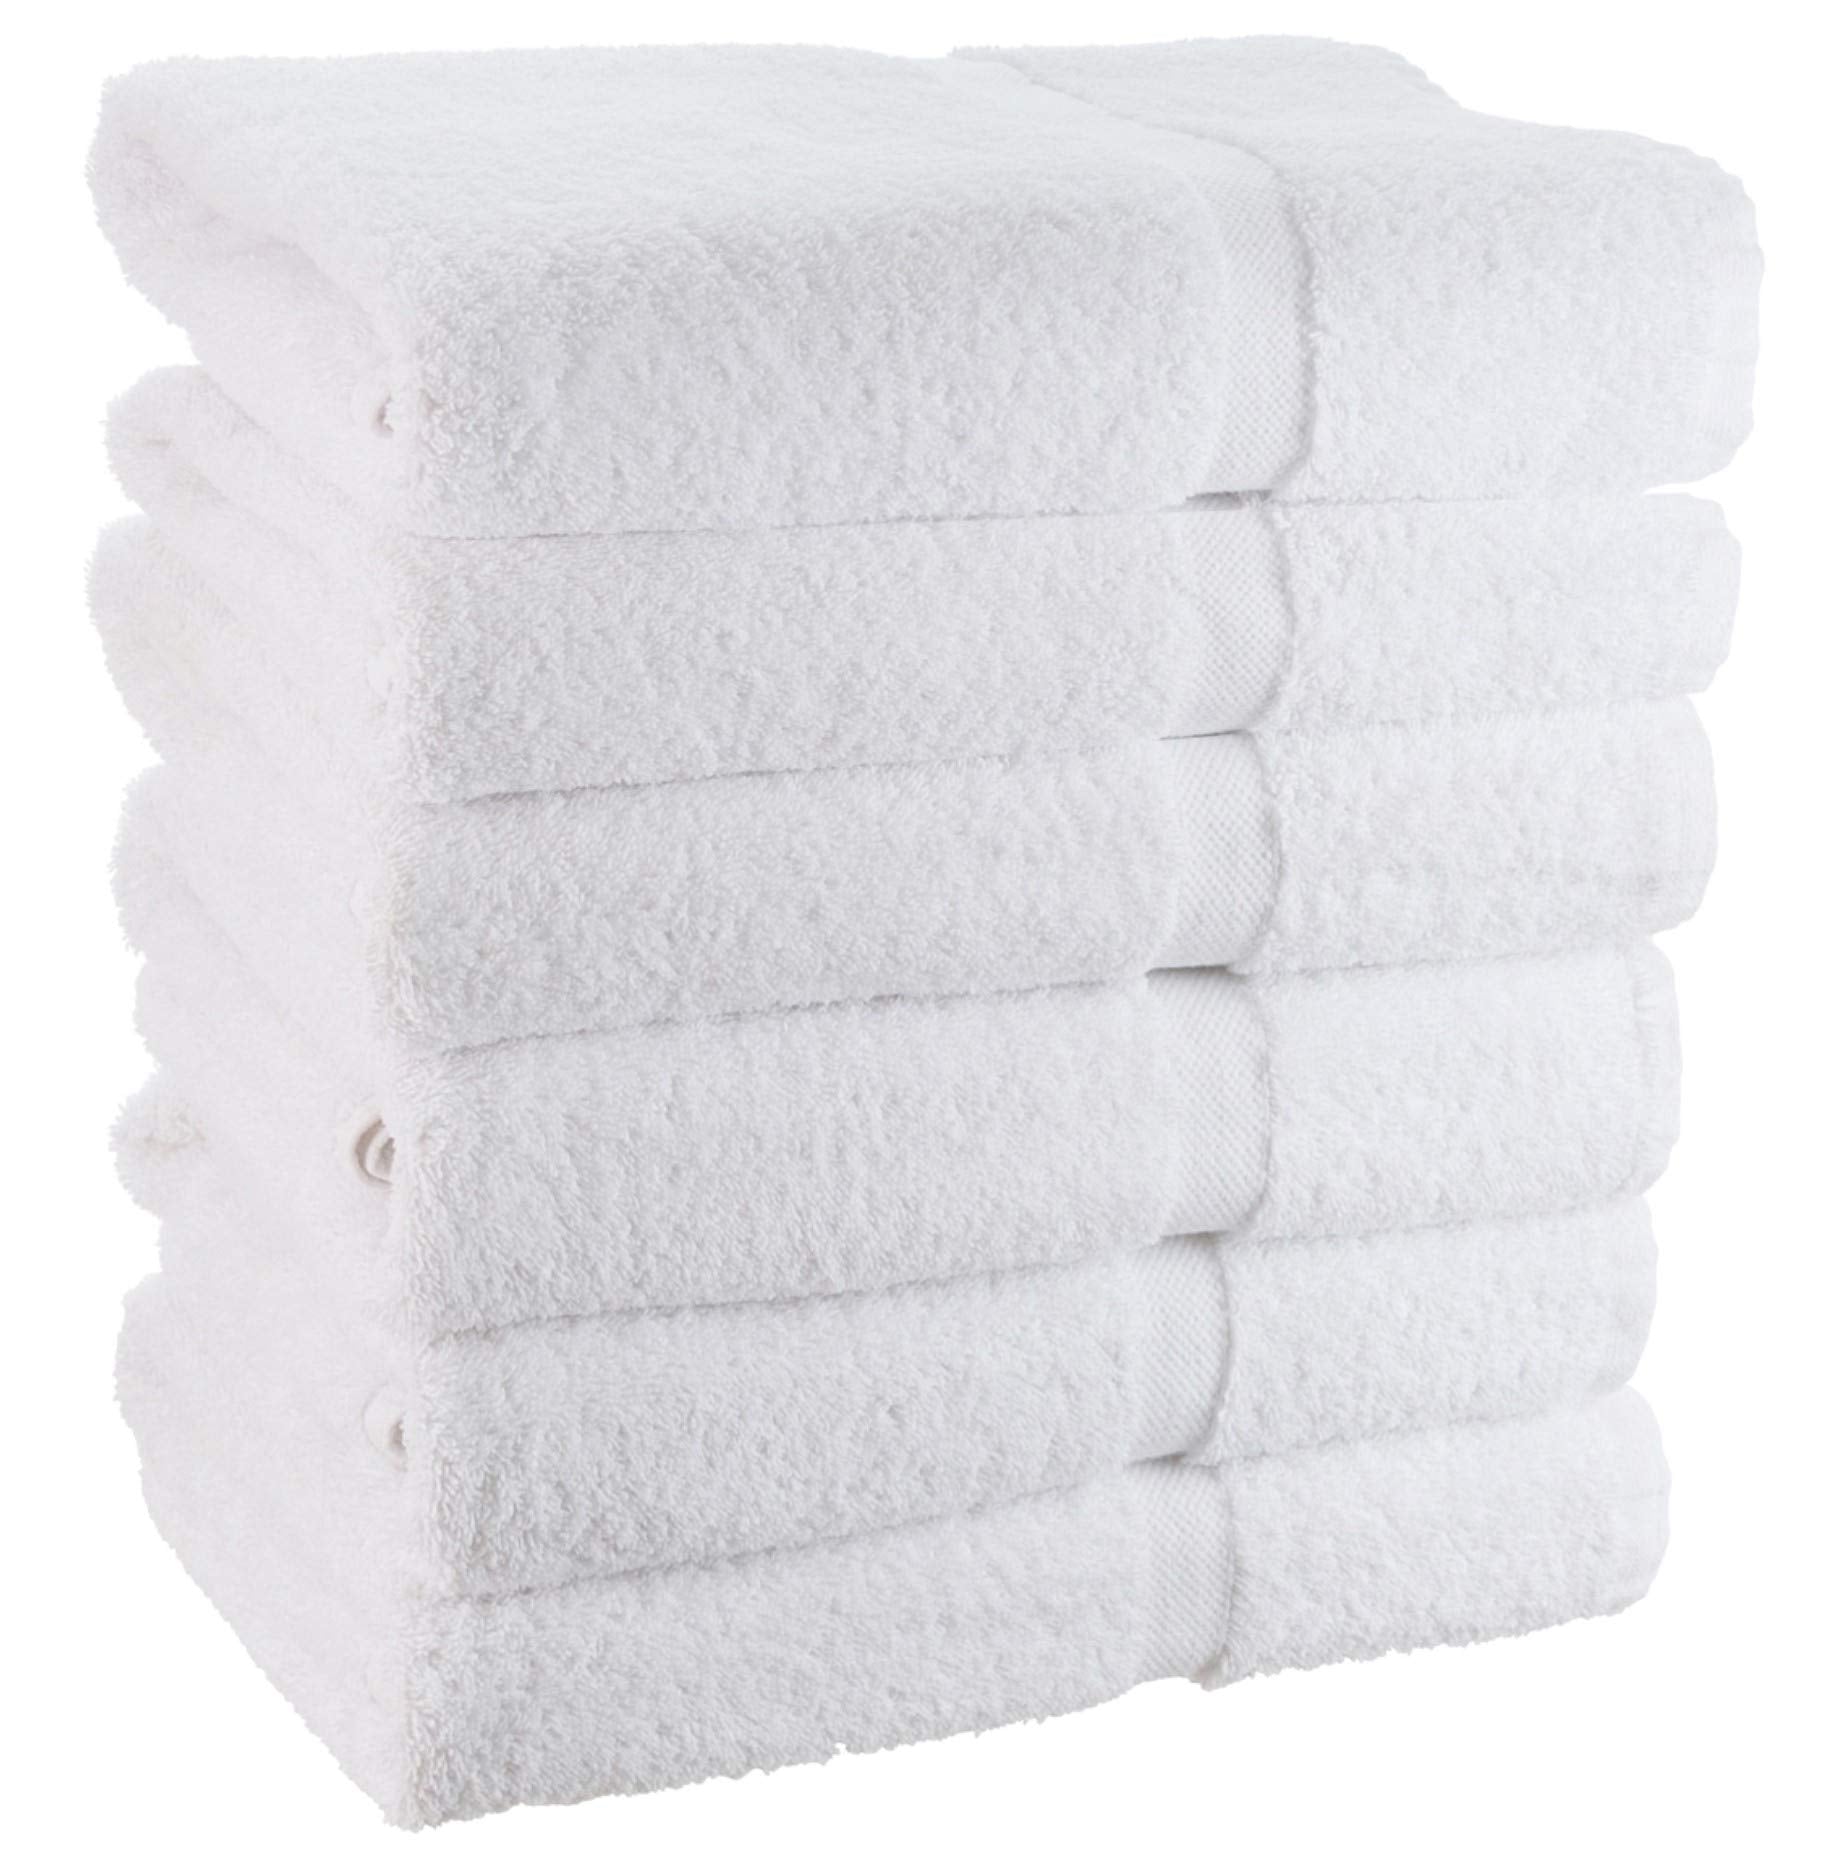 White Classic Wealuxe Grey Towels for Bathroom 6 Pack, Cotton Bath Towel  Set for Hotel, Gym, Spa, Soft Extra Absorbent Quick Dry 24x50 Inch